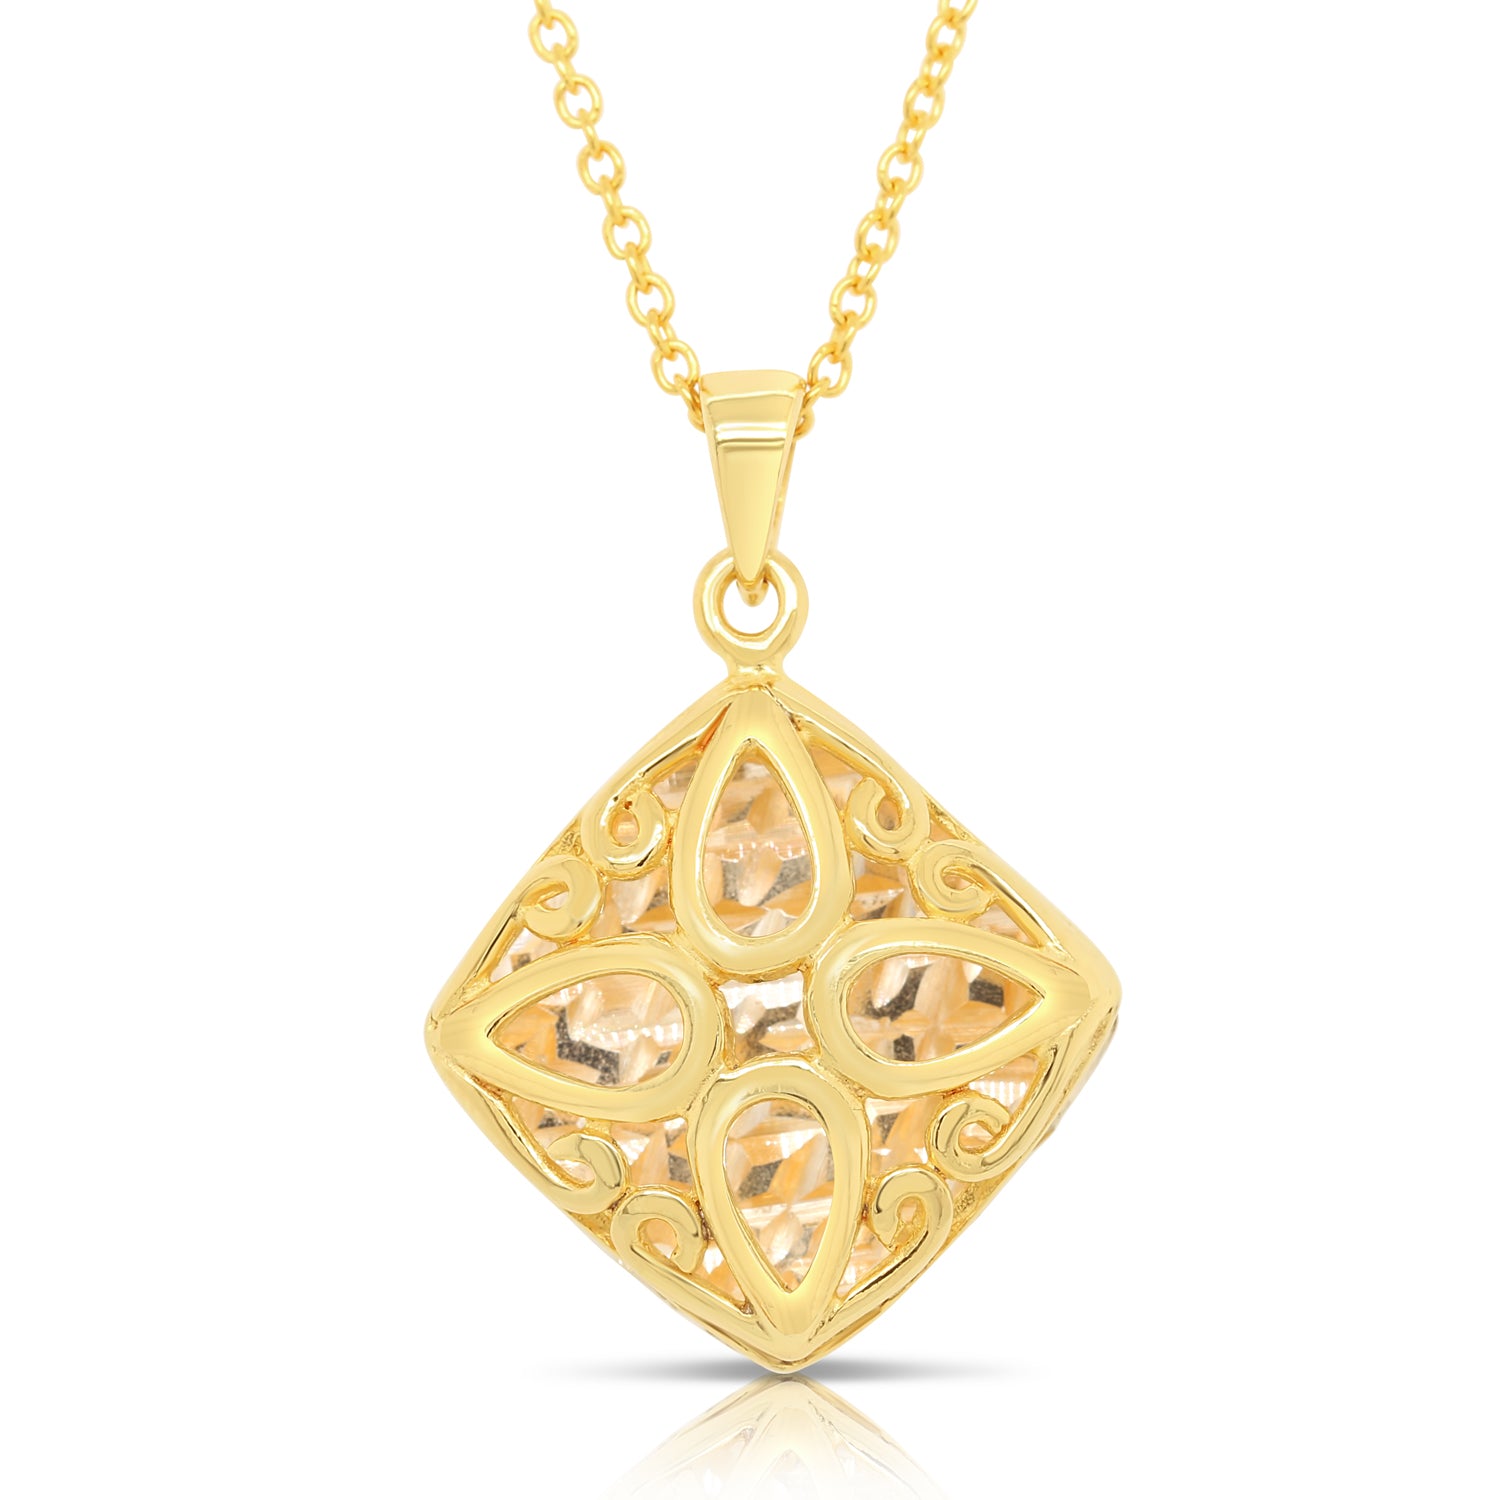 Diamond Charm Necklace, Yellow Gold Plated in Sterling Silver